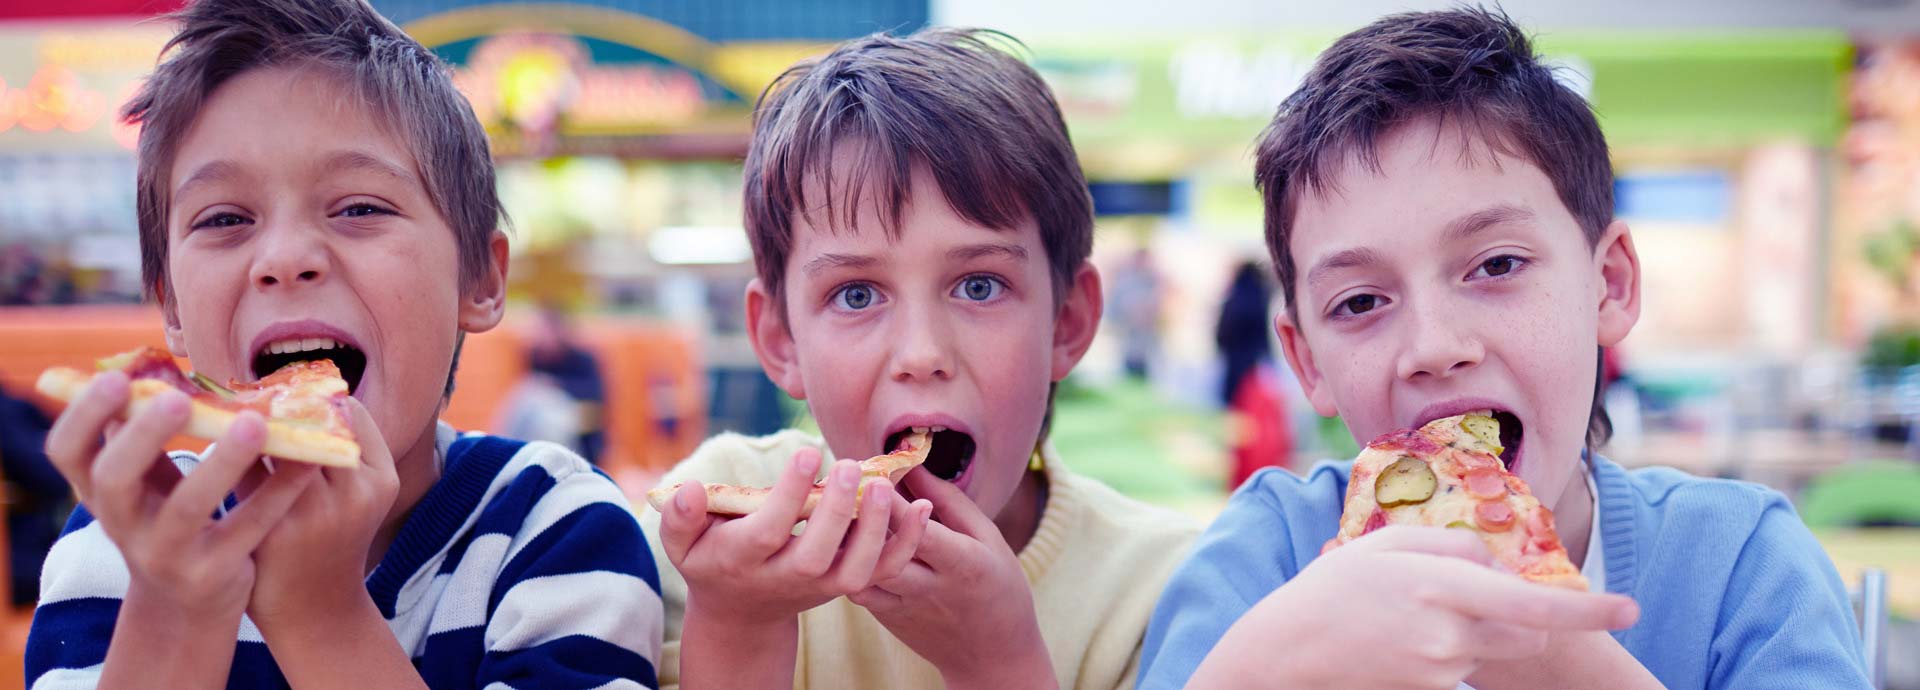 The 5 things Junk Foods can do to us